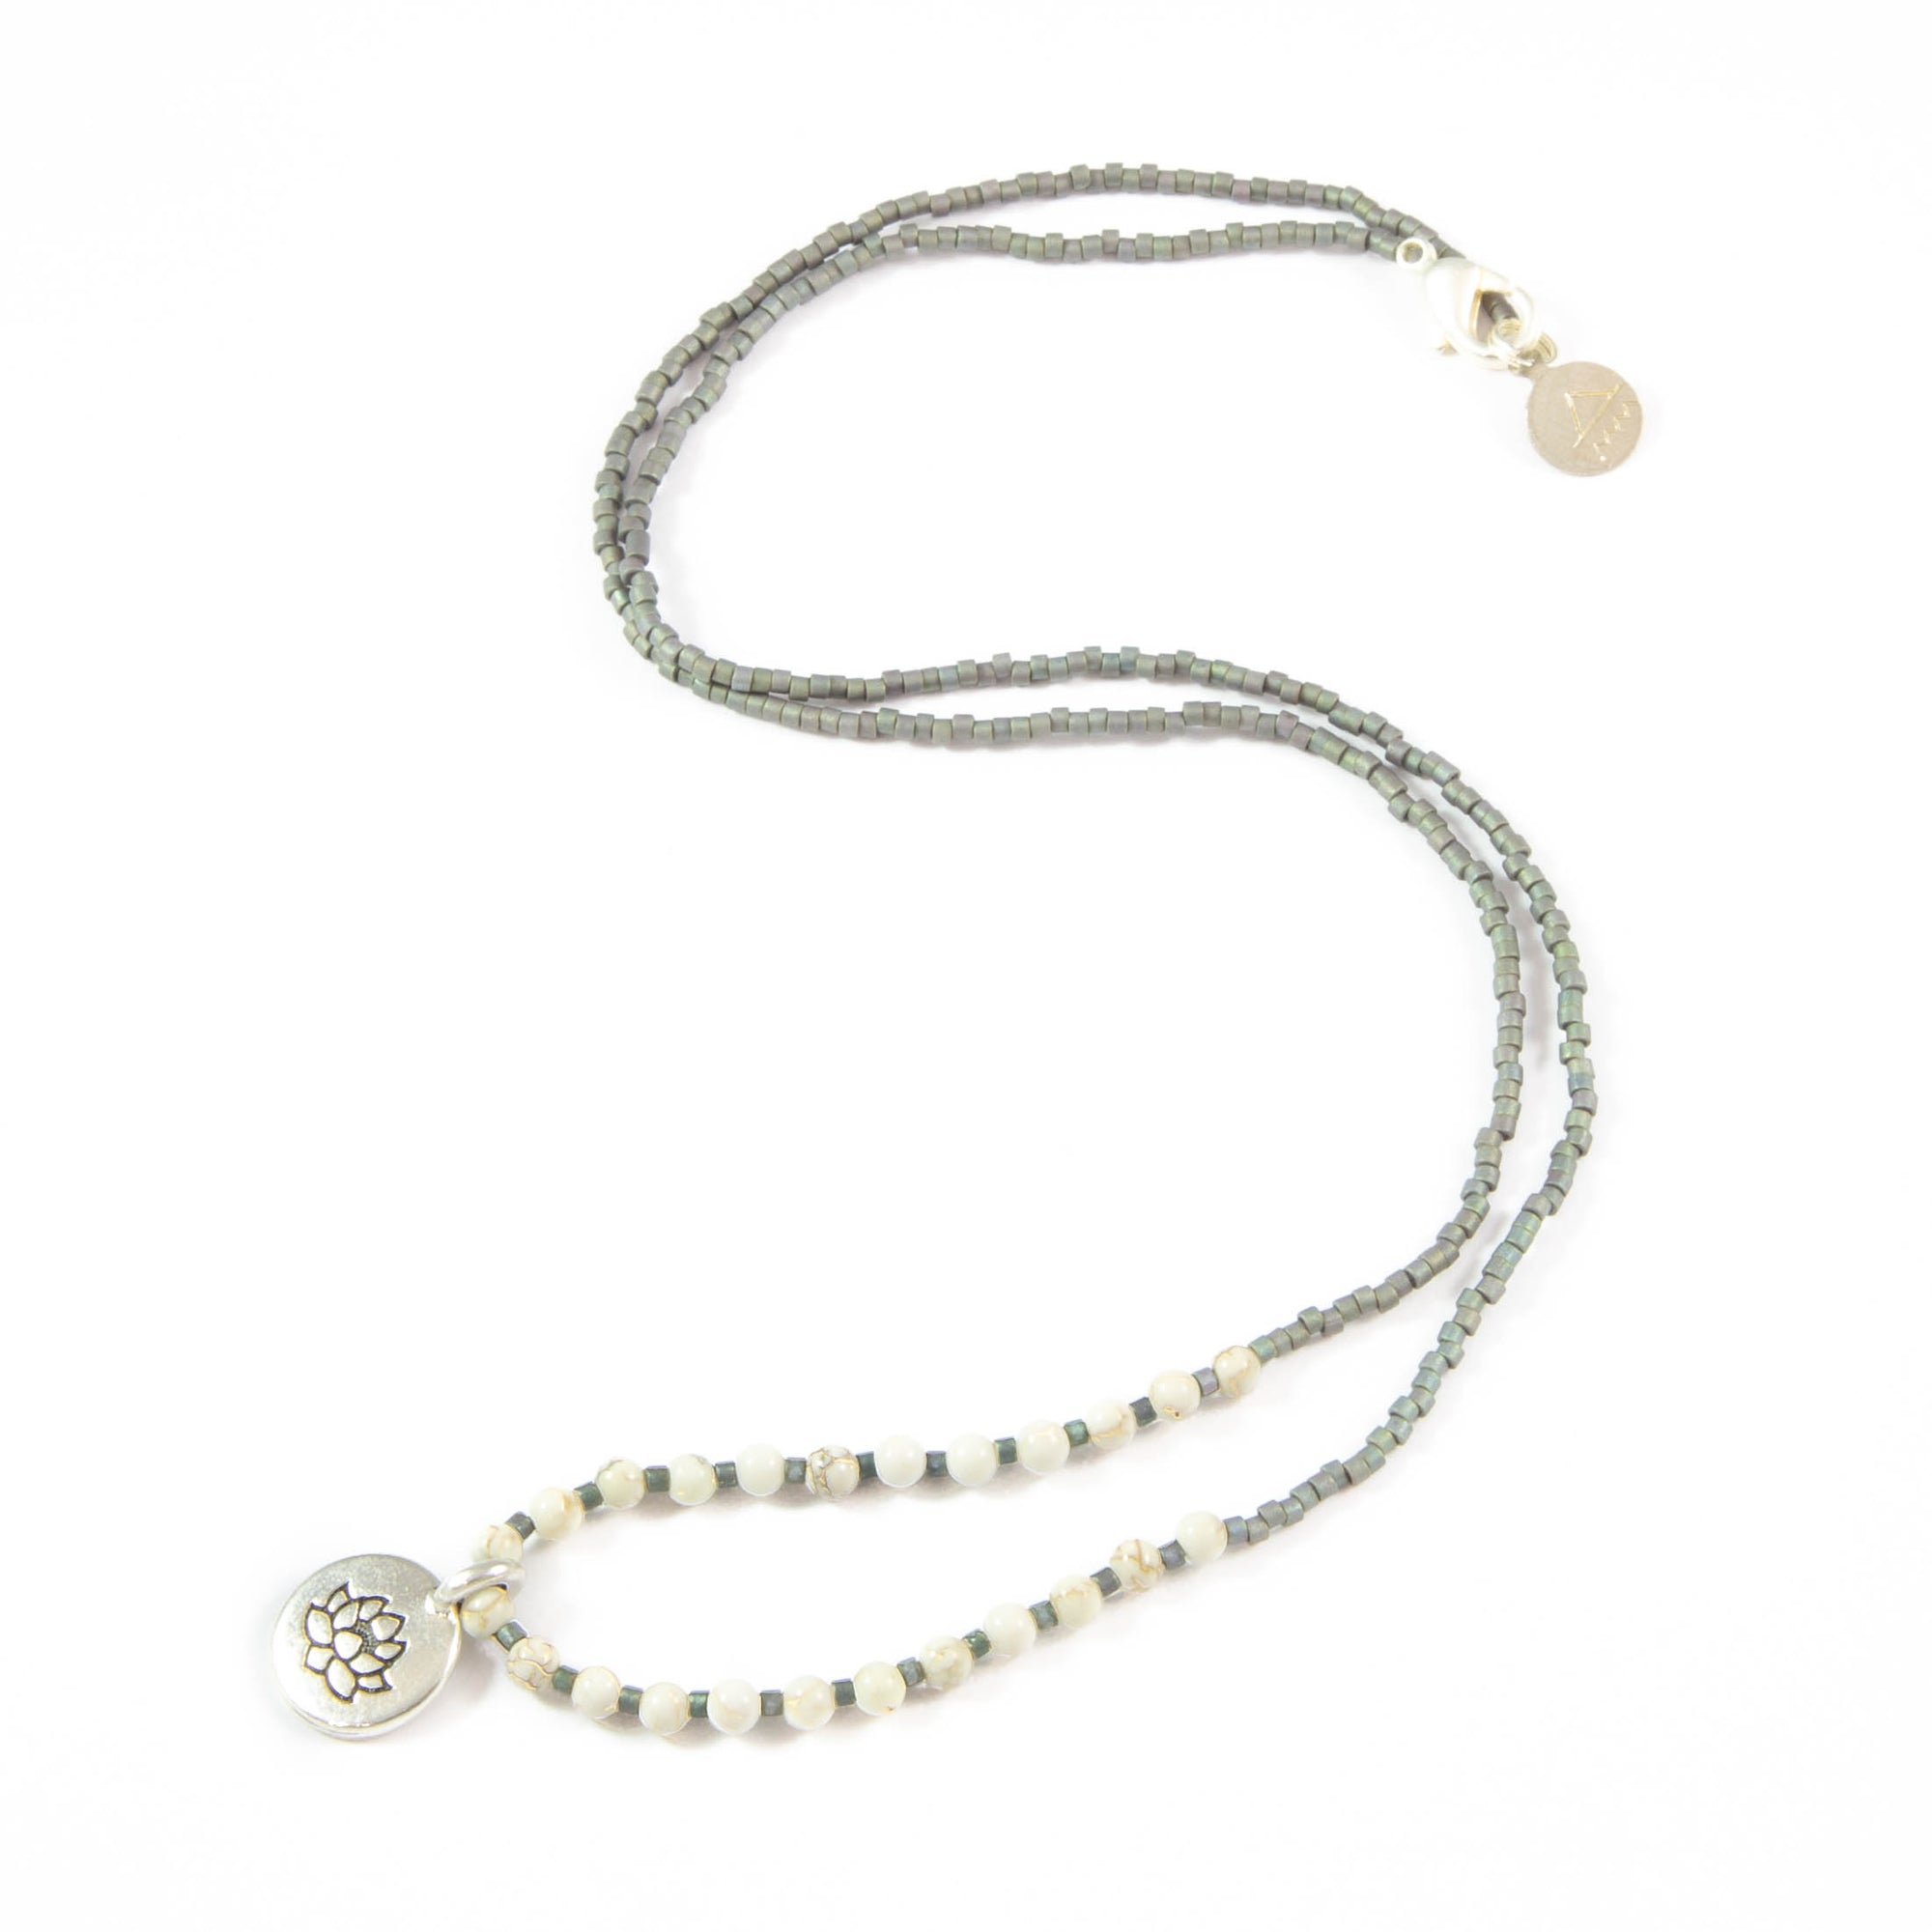 Denim w/ White Turquoise Stone Lotus Charm Necklace in Silver